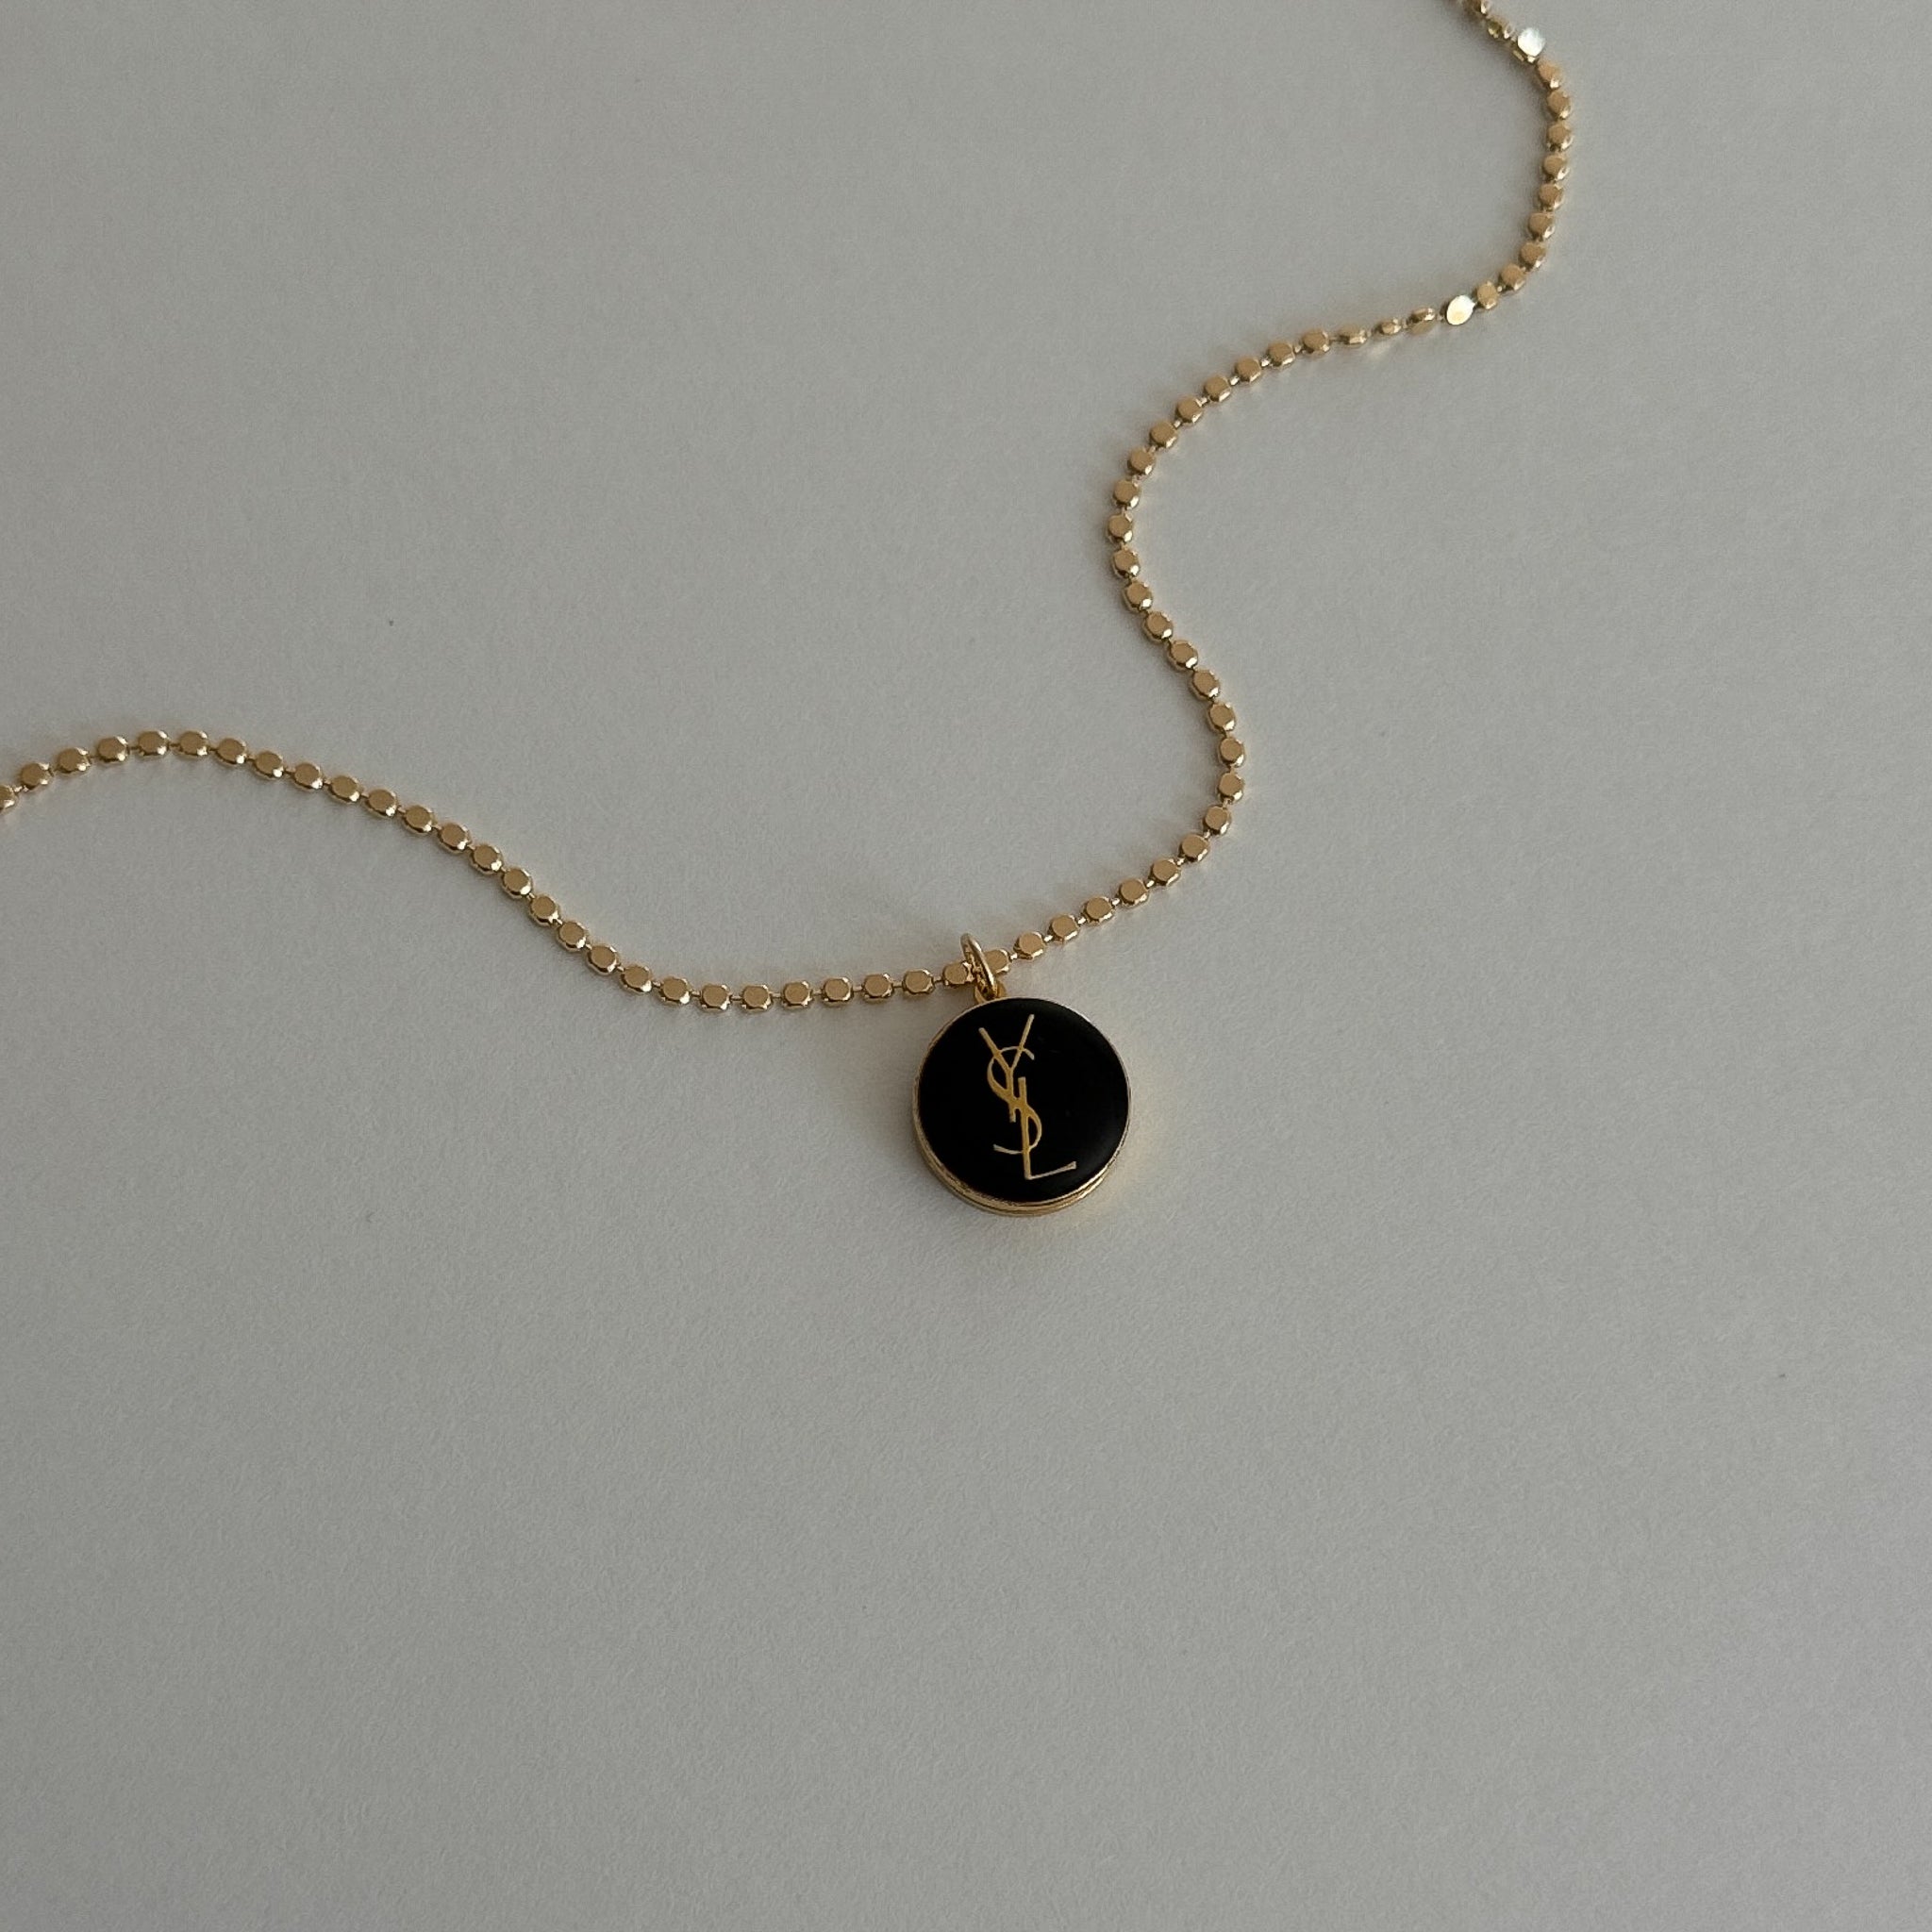 Authentic Vintage YSL Handcrafted Pendant on 18k Gold Filled Chain